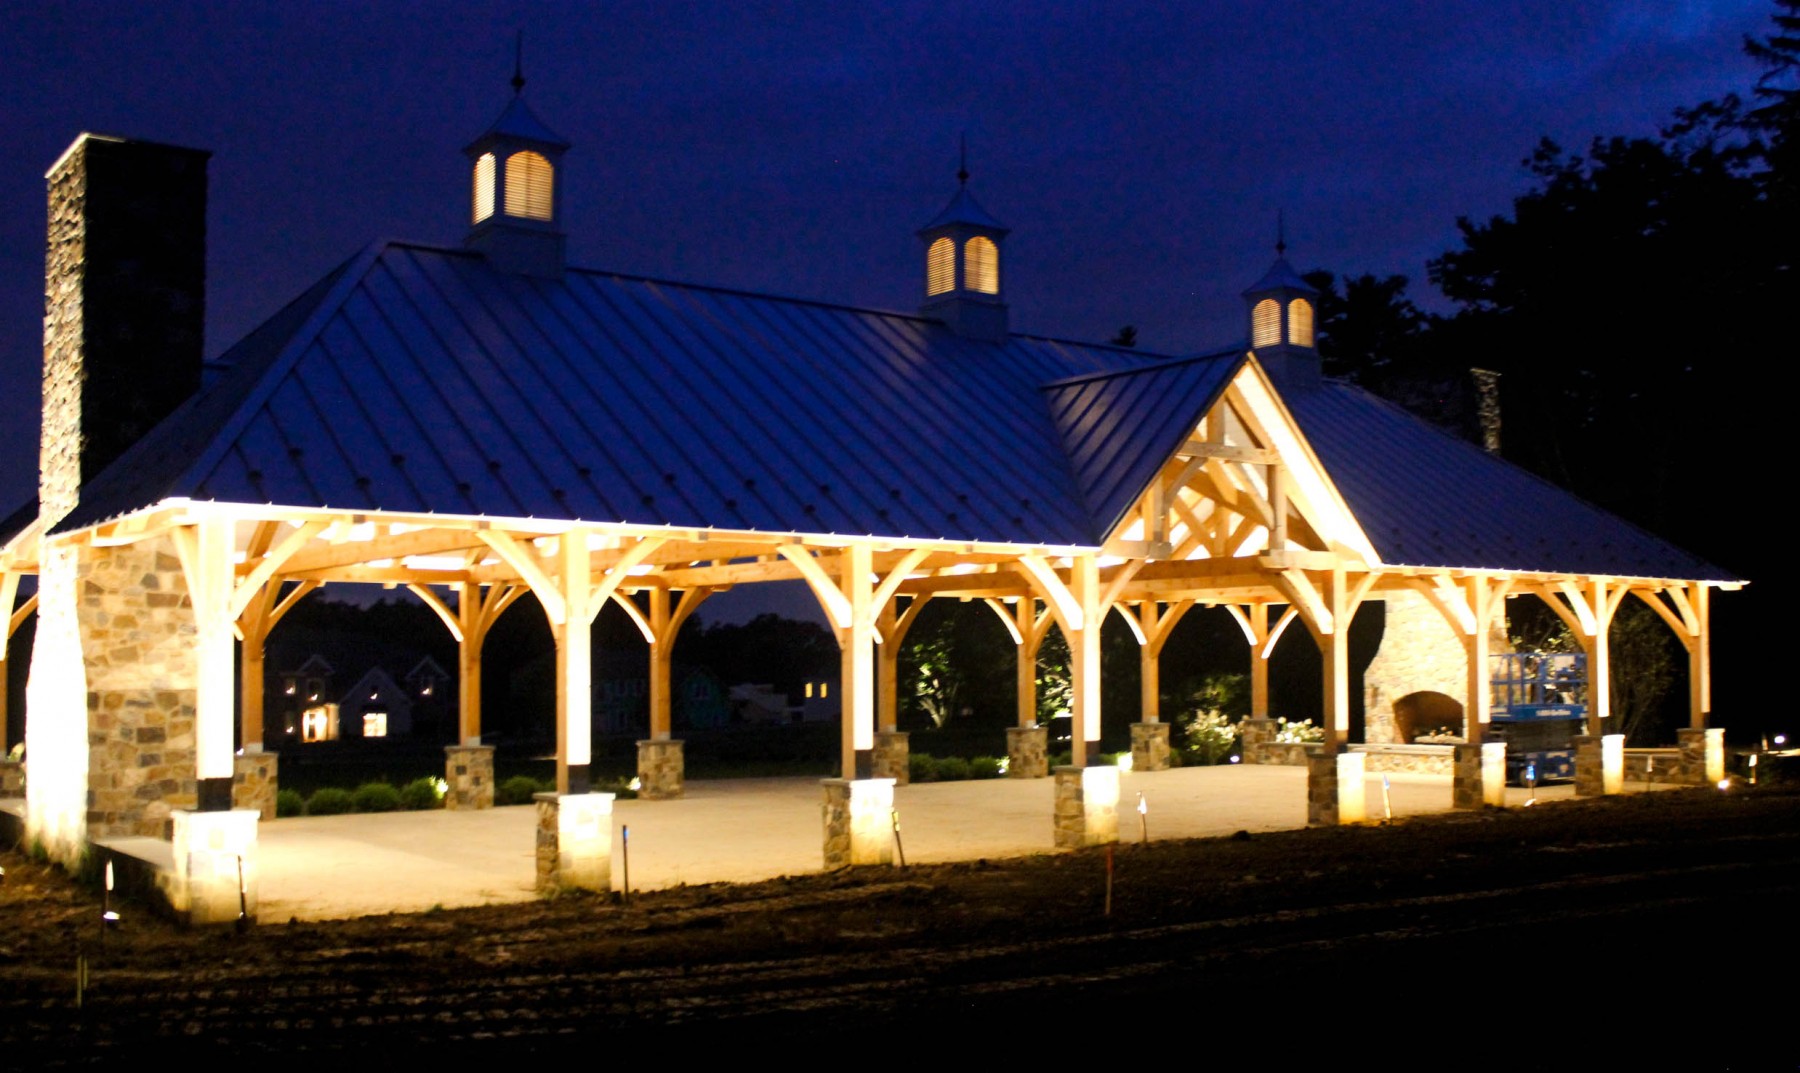 Liseter Pavilion by Toll Brothers, Newtown Square PA